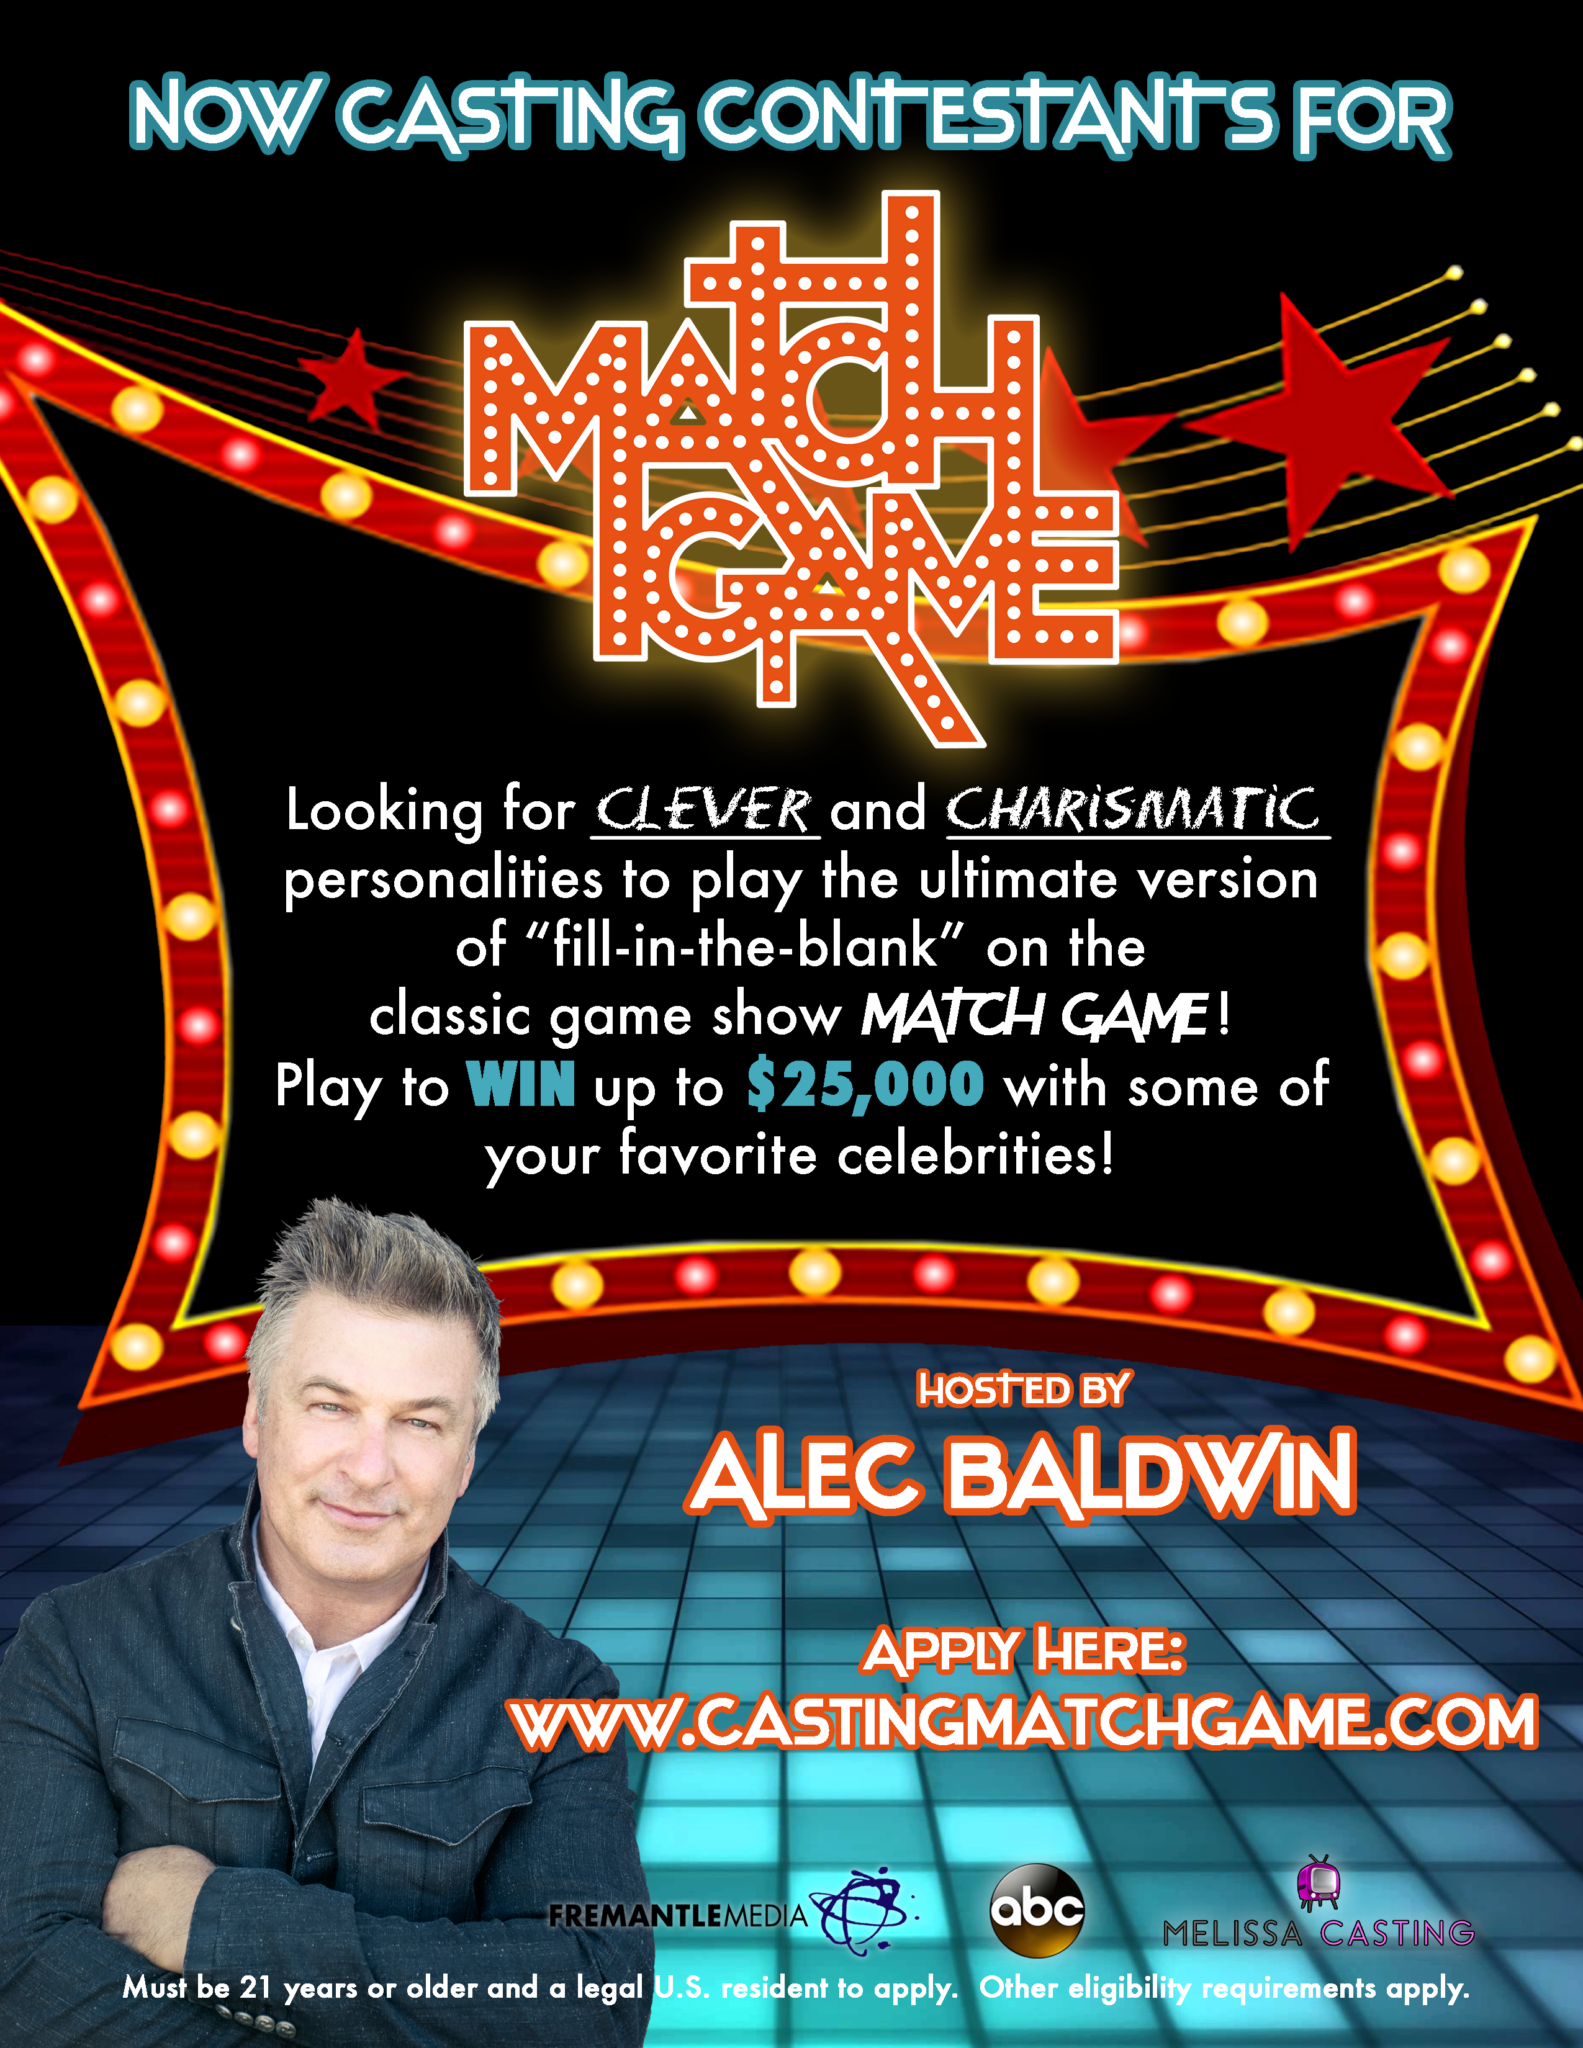 How can you apply to become a game show contestant?